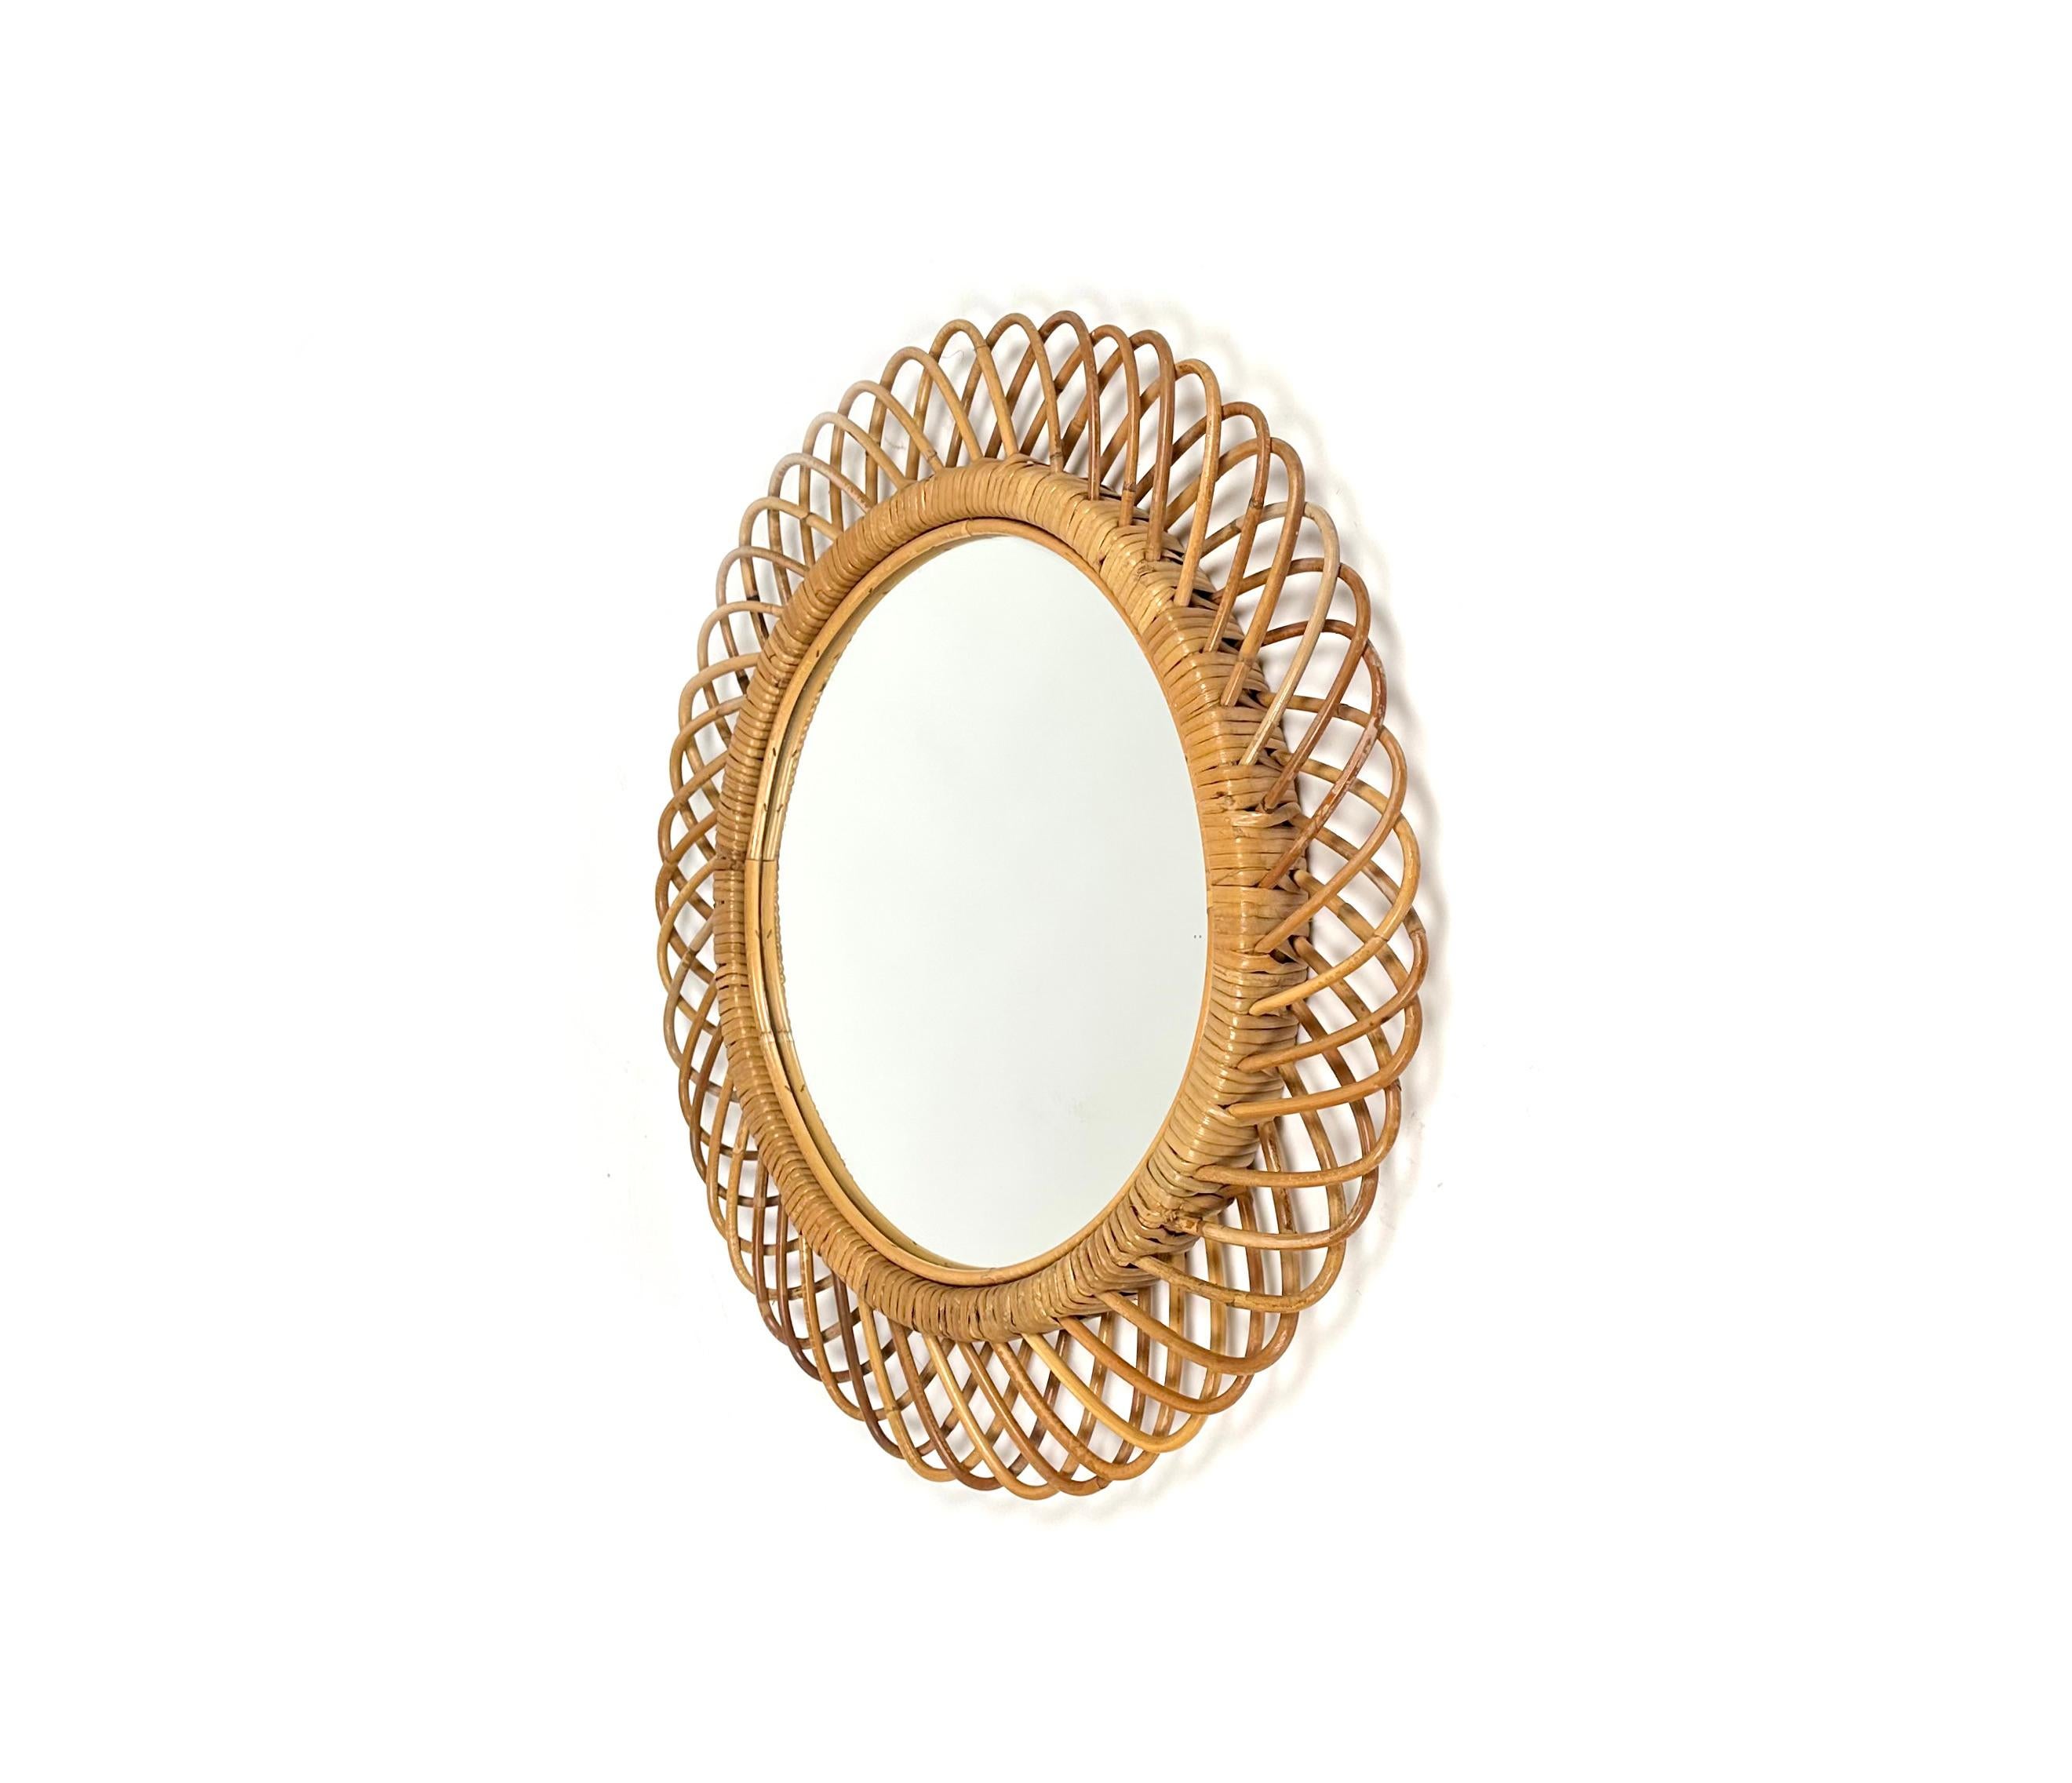 Midcentury Rattan and Bamboo Round Wall Mirror, Italy, 1960s In Good Condition For Sale In Rome, IT